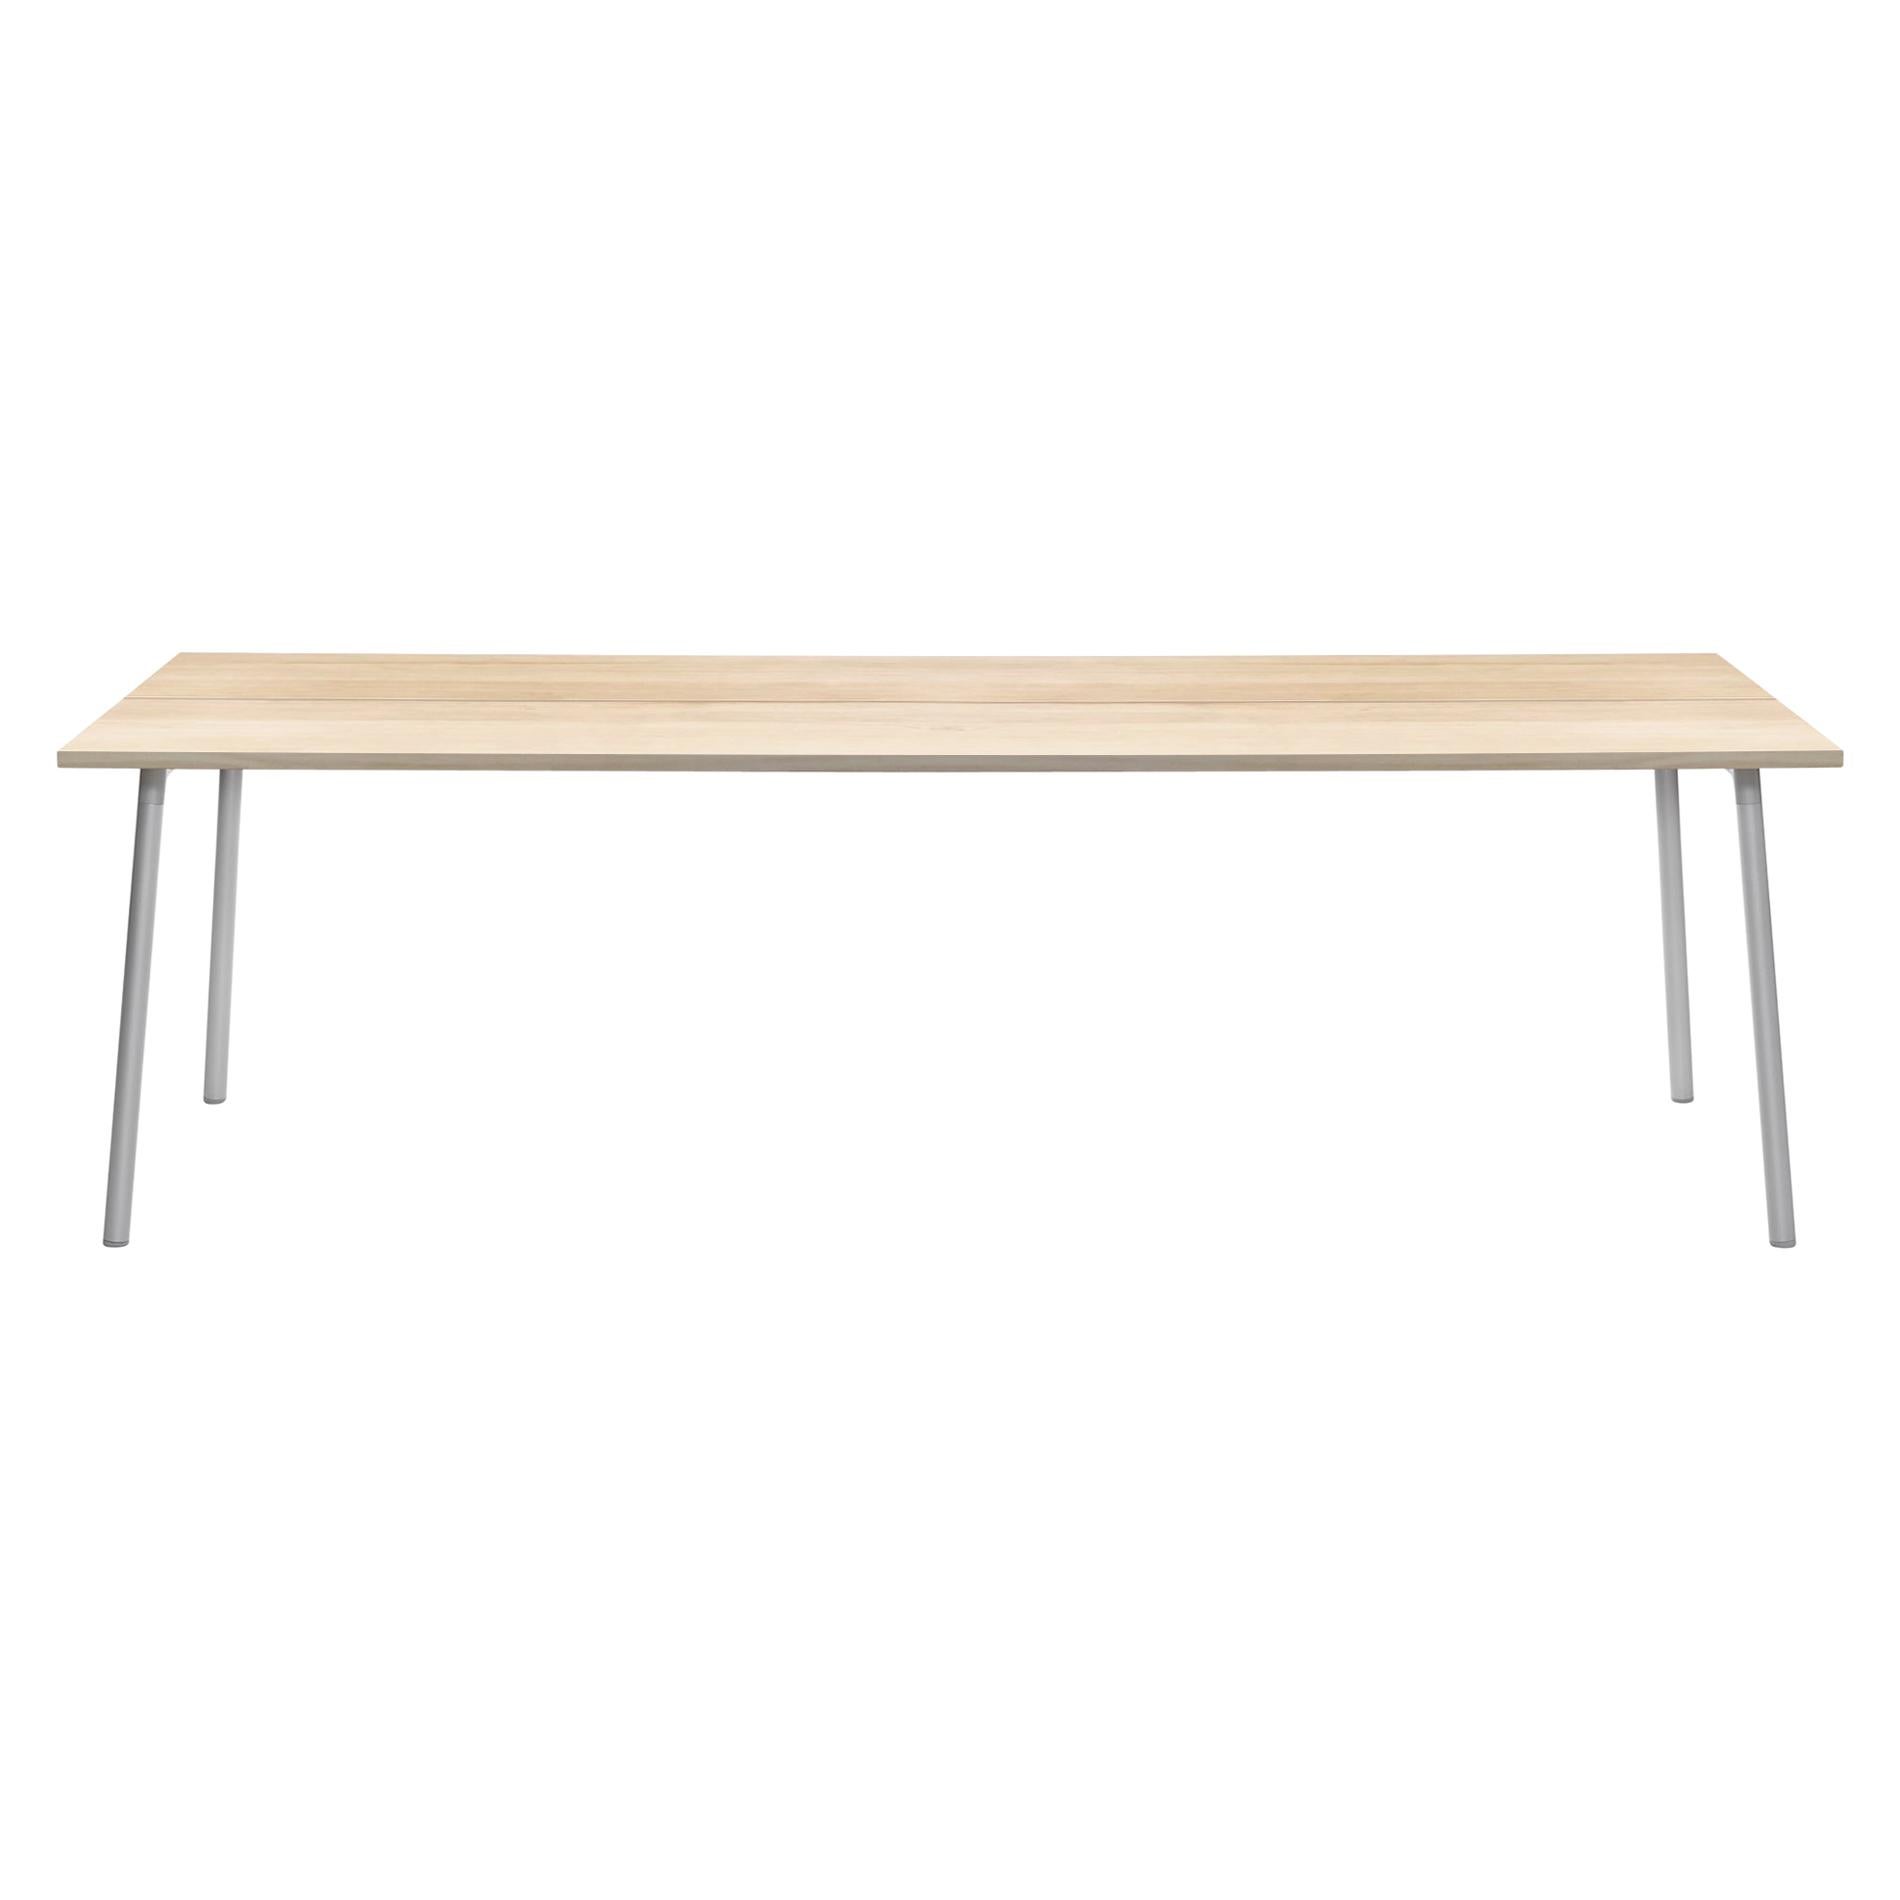 Emeco Run 96" Table with Aluminum Frame & Wood Top by Sam Hecht and Kim Colin For Sale